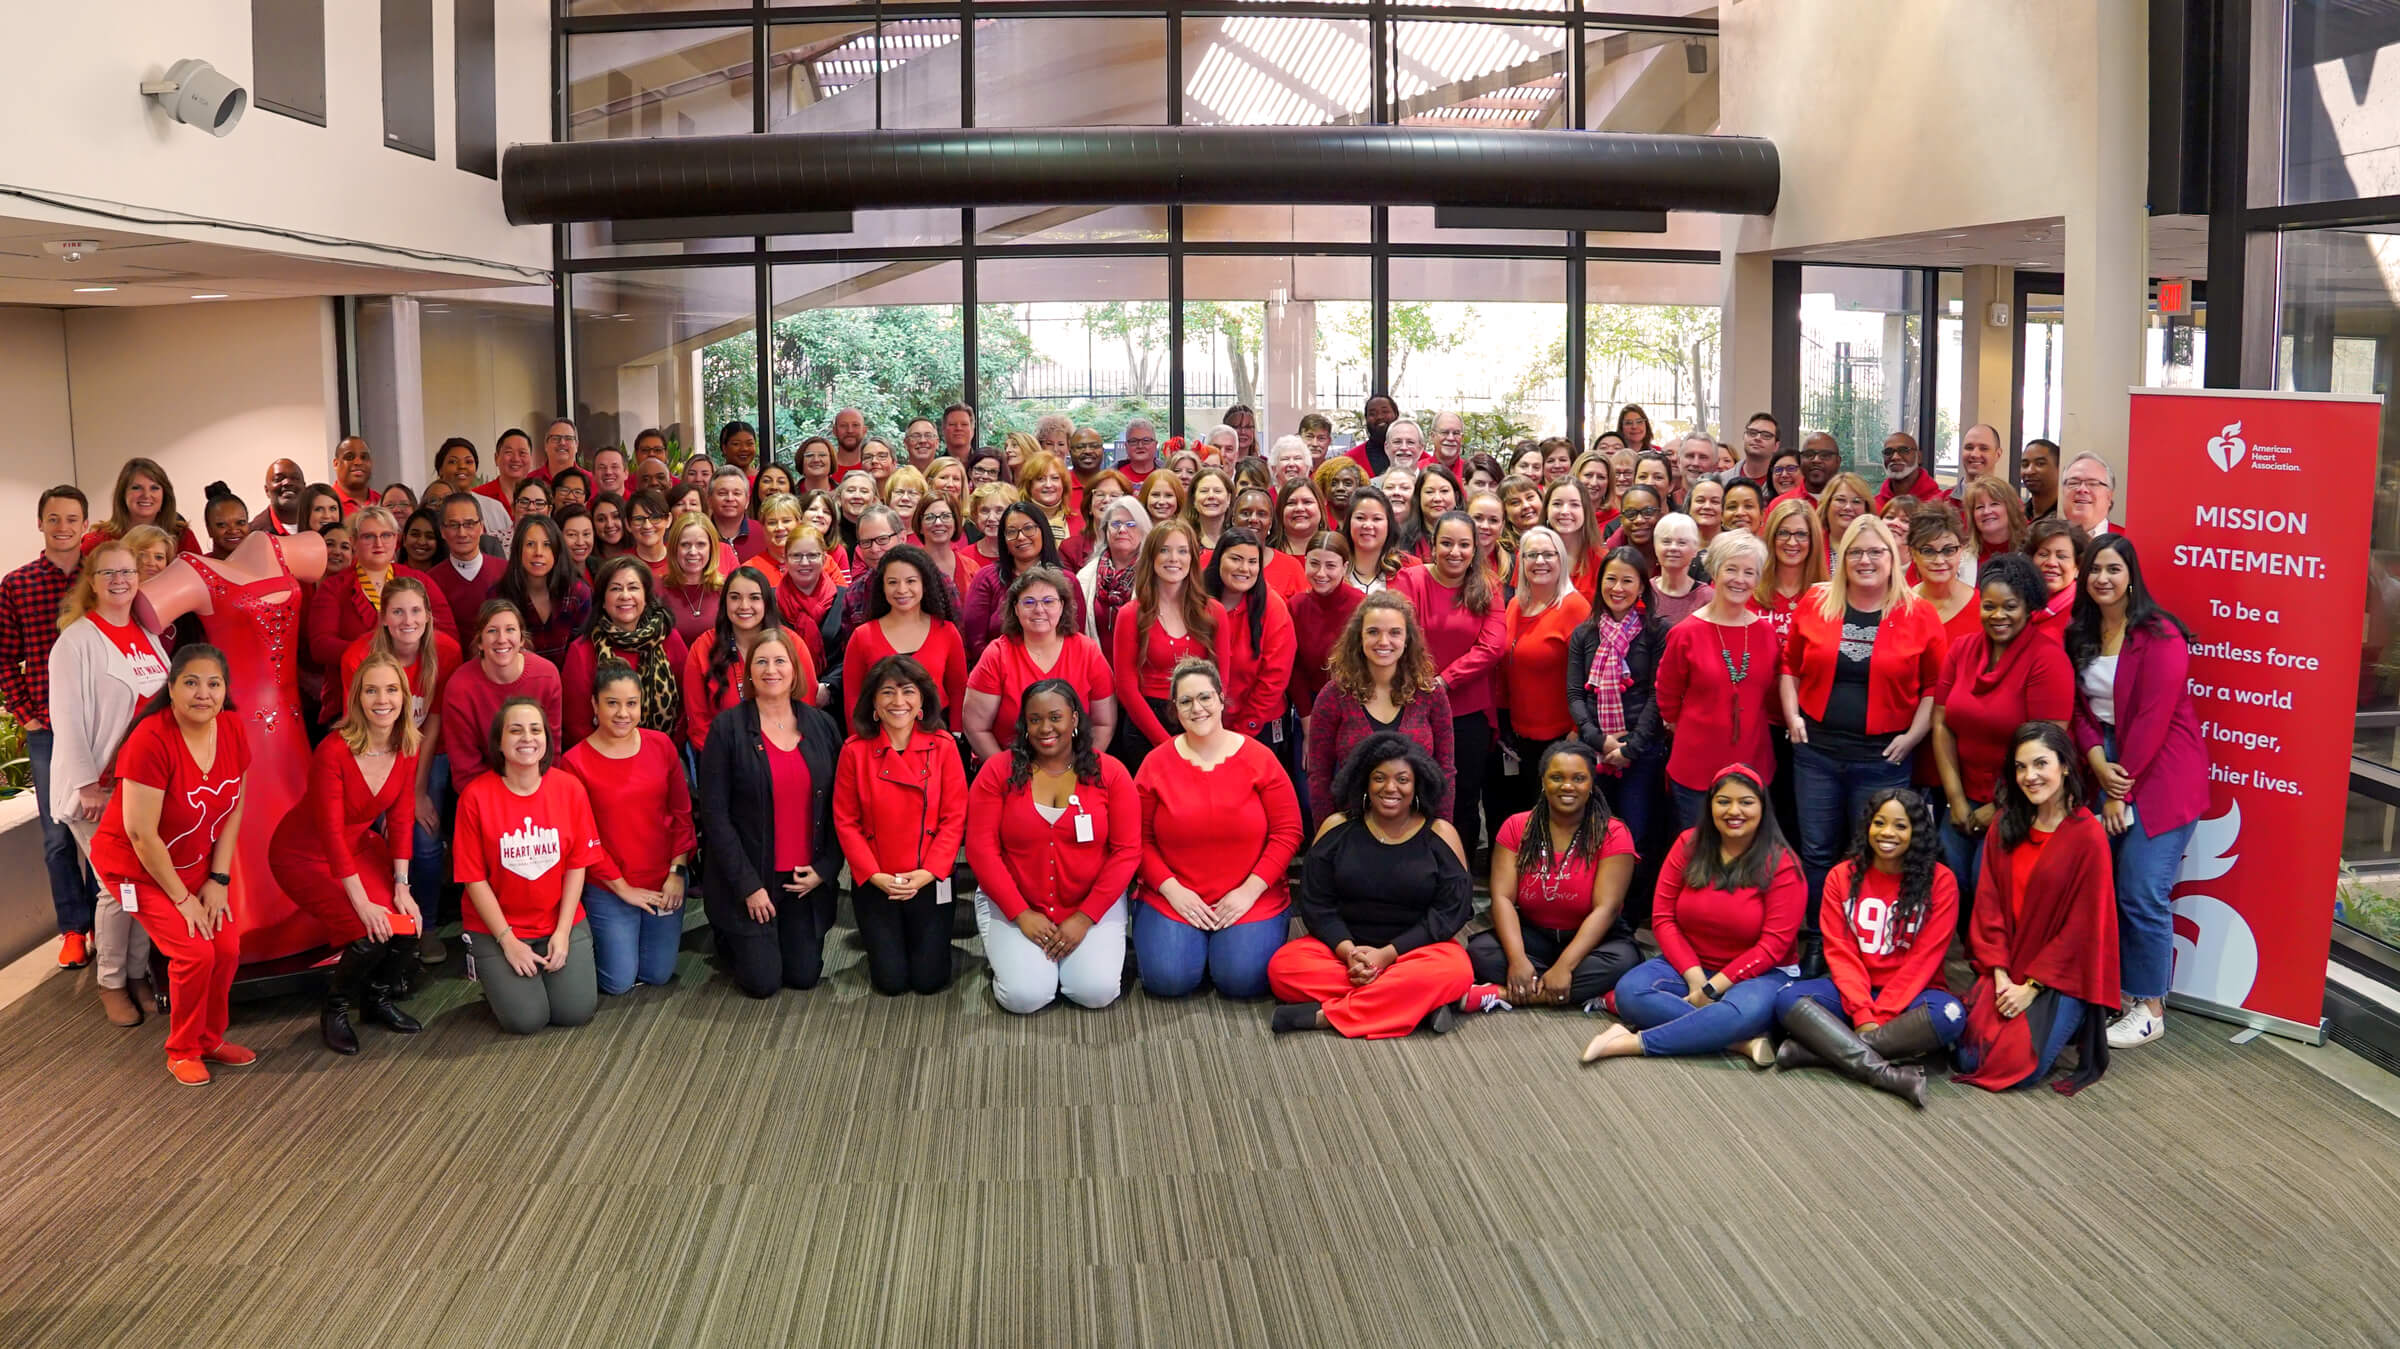 A large group photo of American Heart Association employees